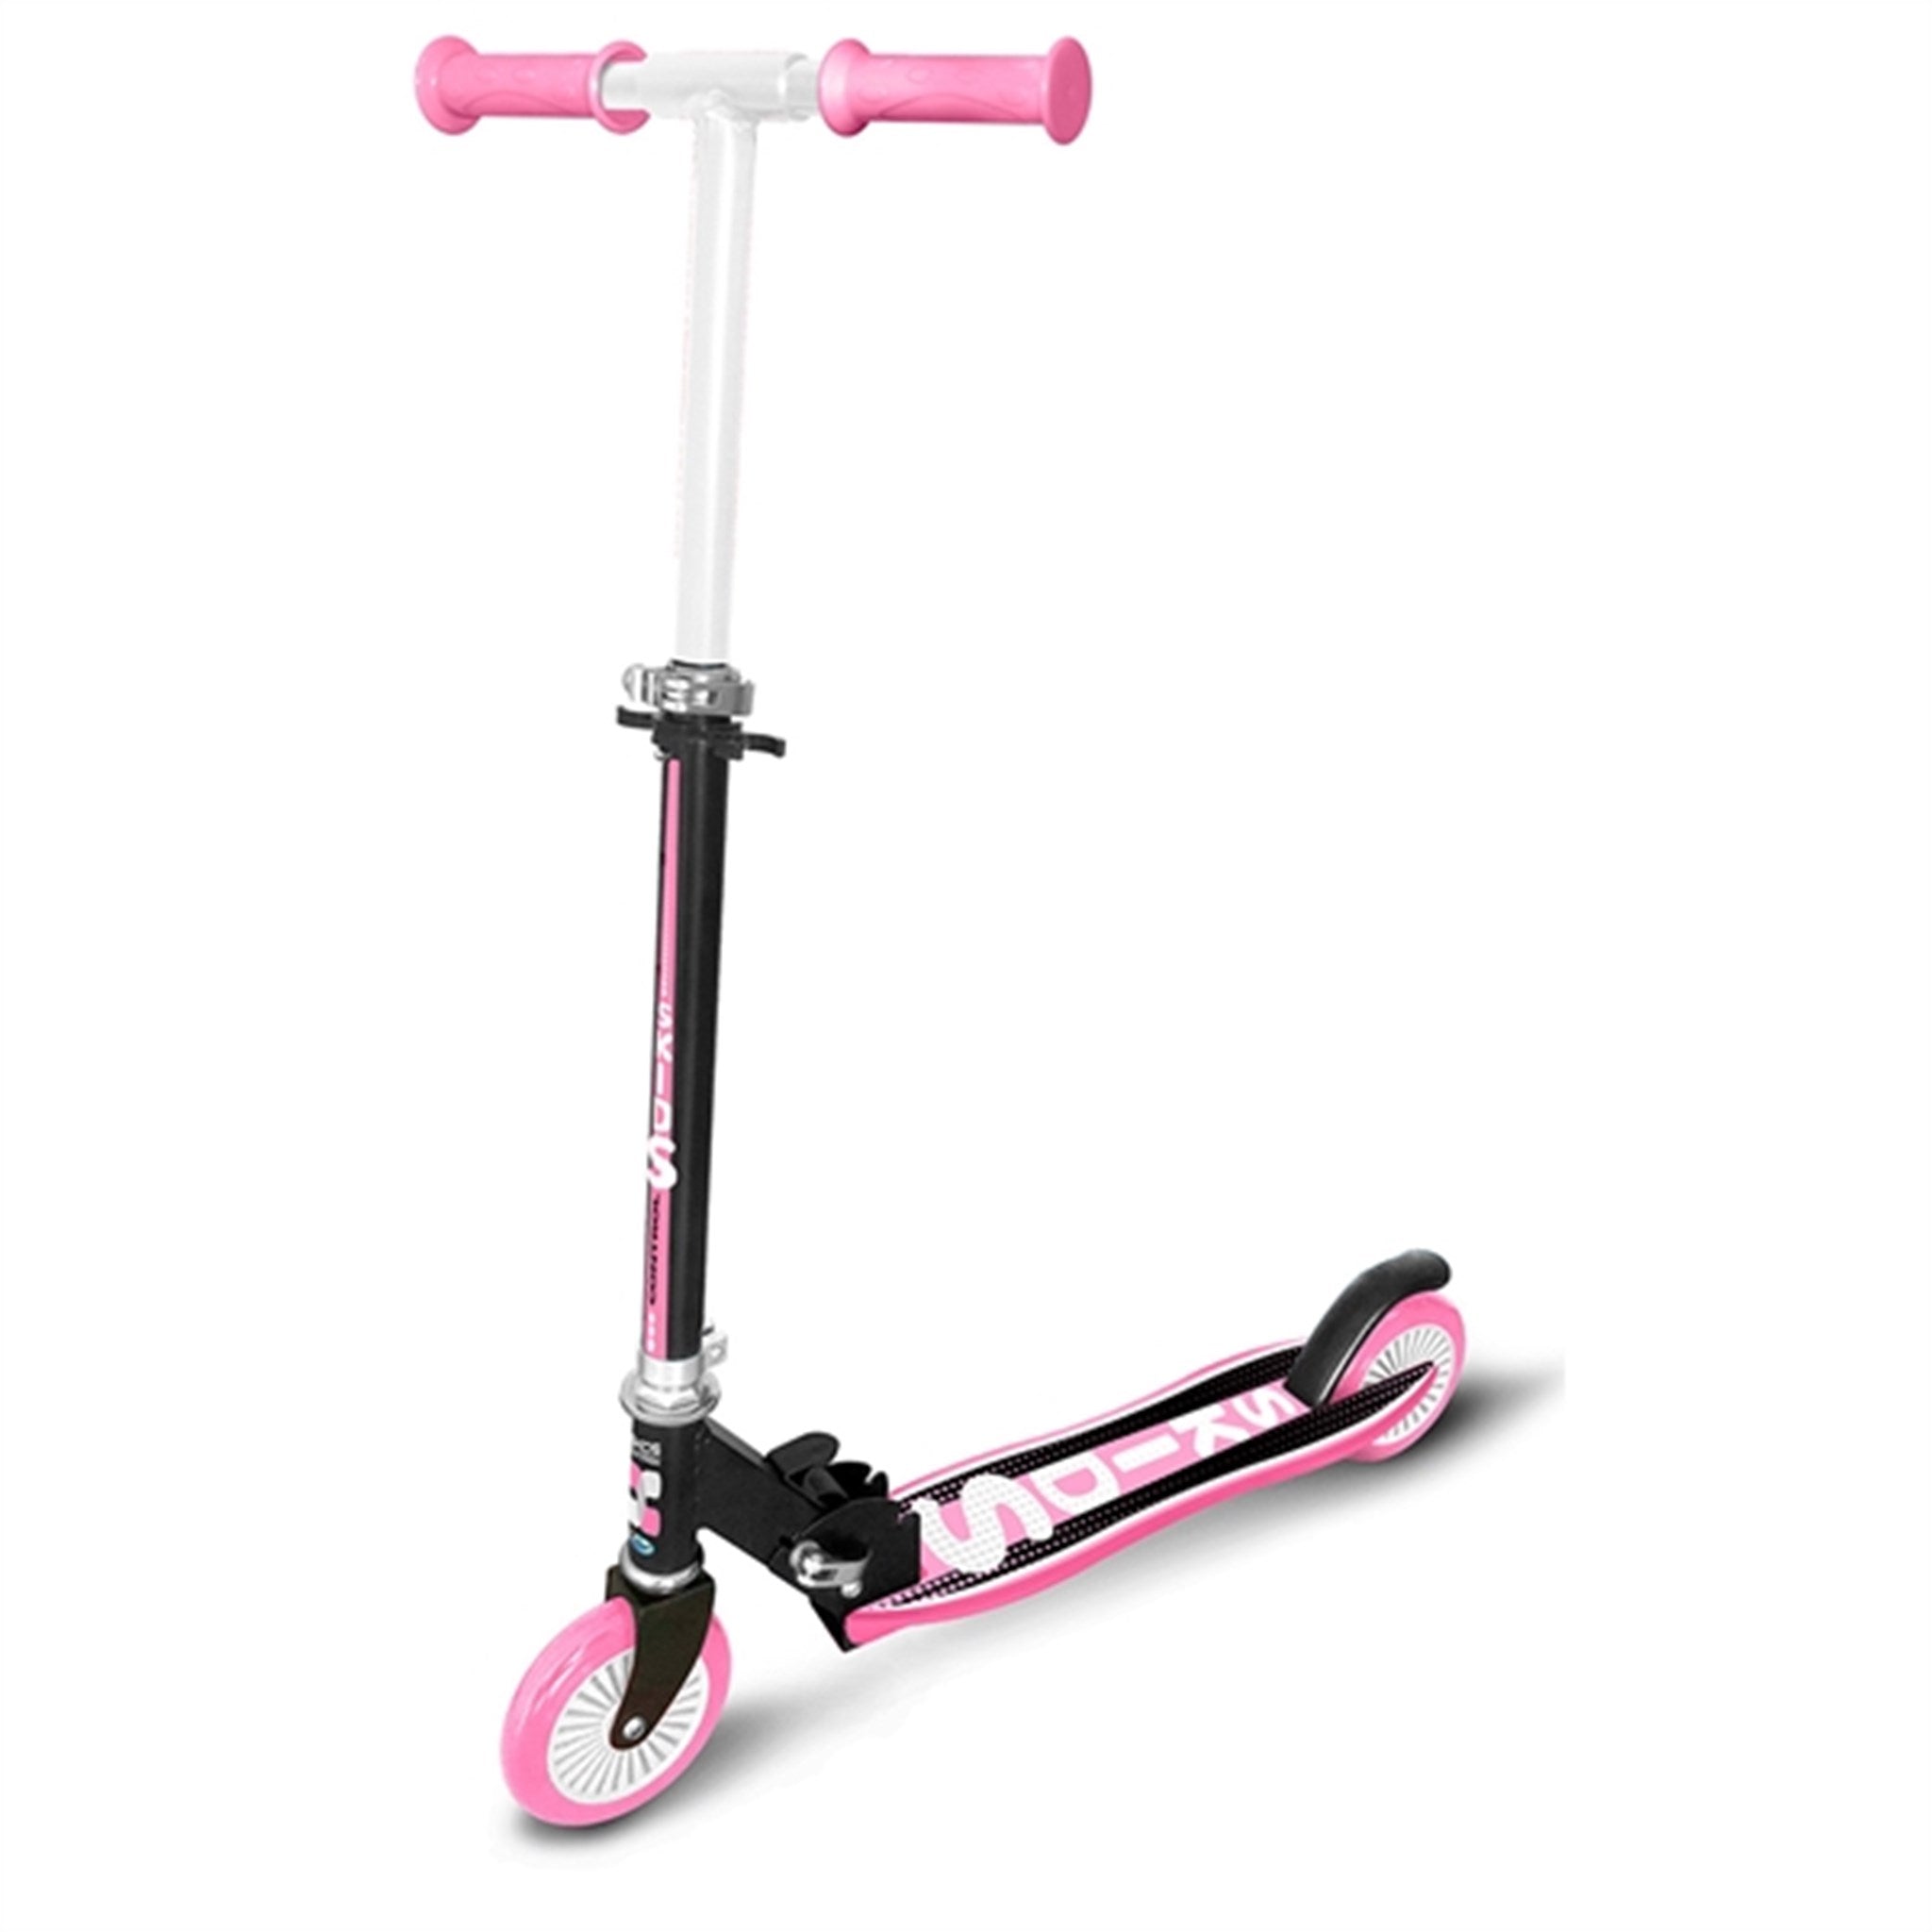 Skids Control Foldable Scooter Pink